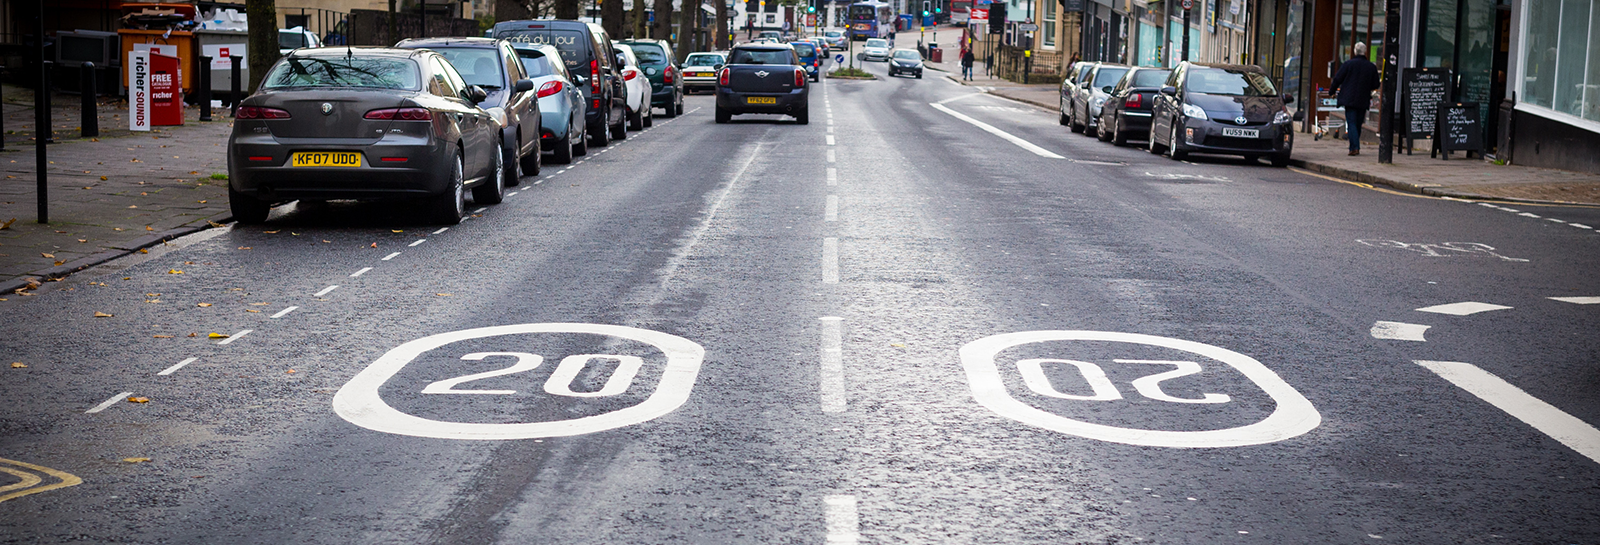 20mph road markings banner image